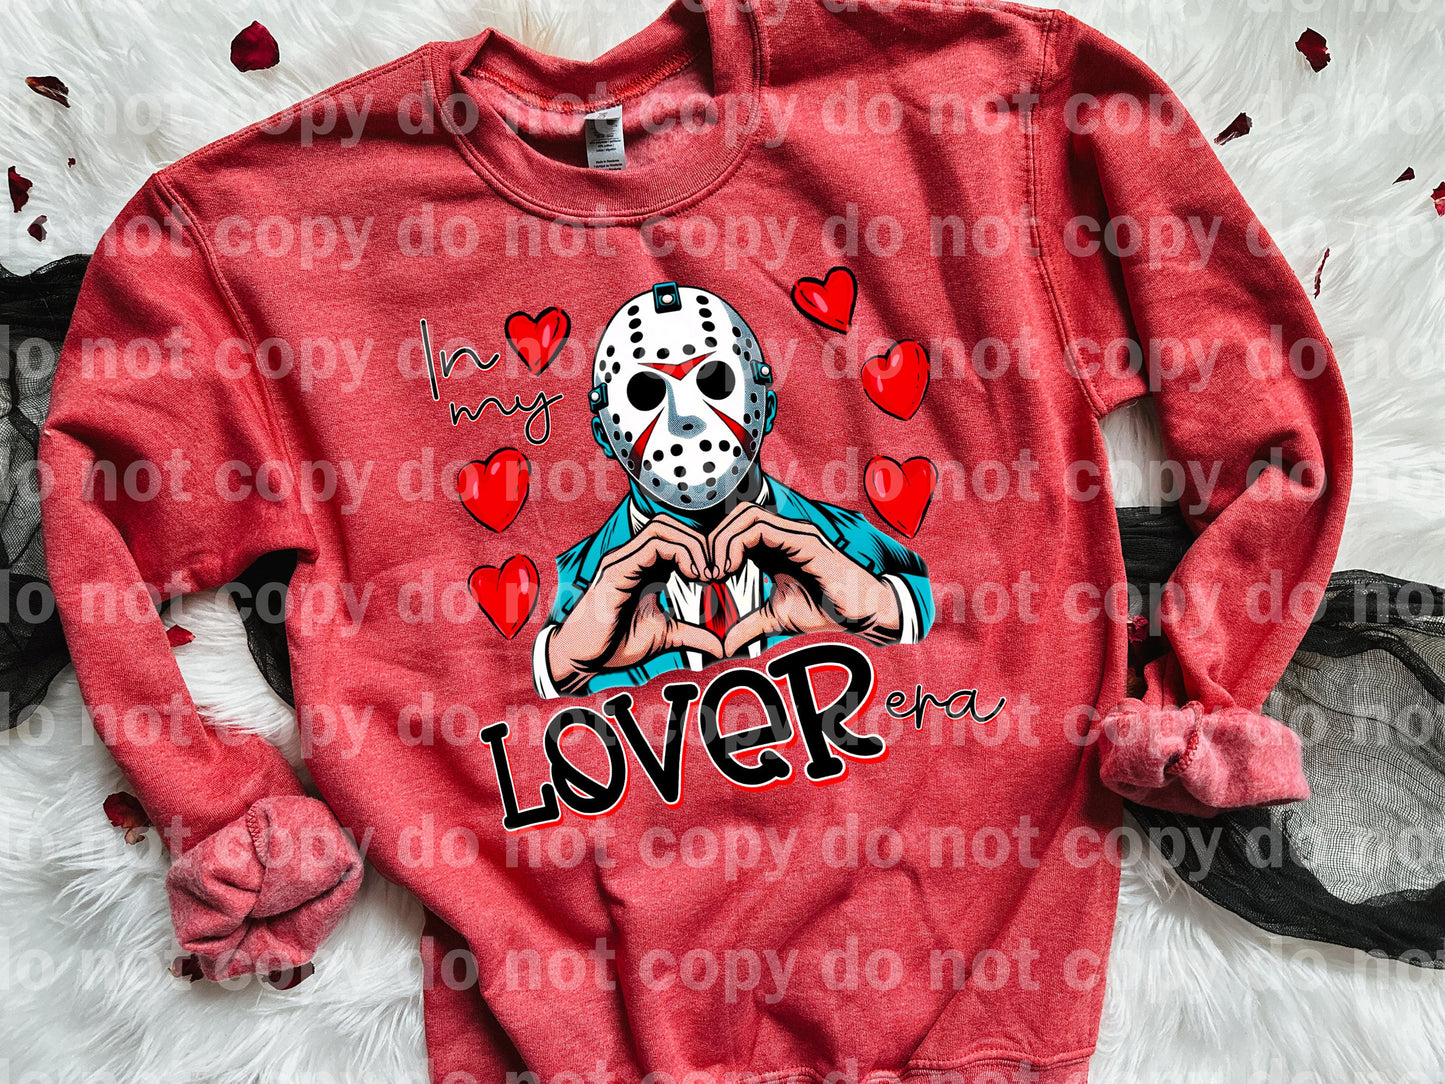 In My Lover Era Jason Dream Print or Sublimation Print